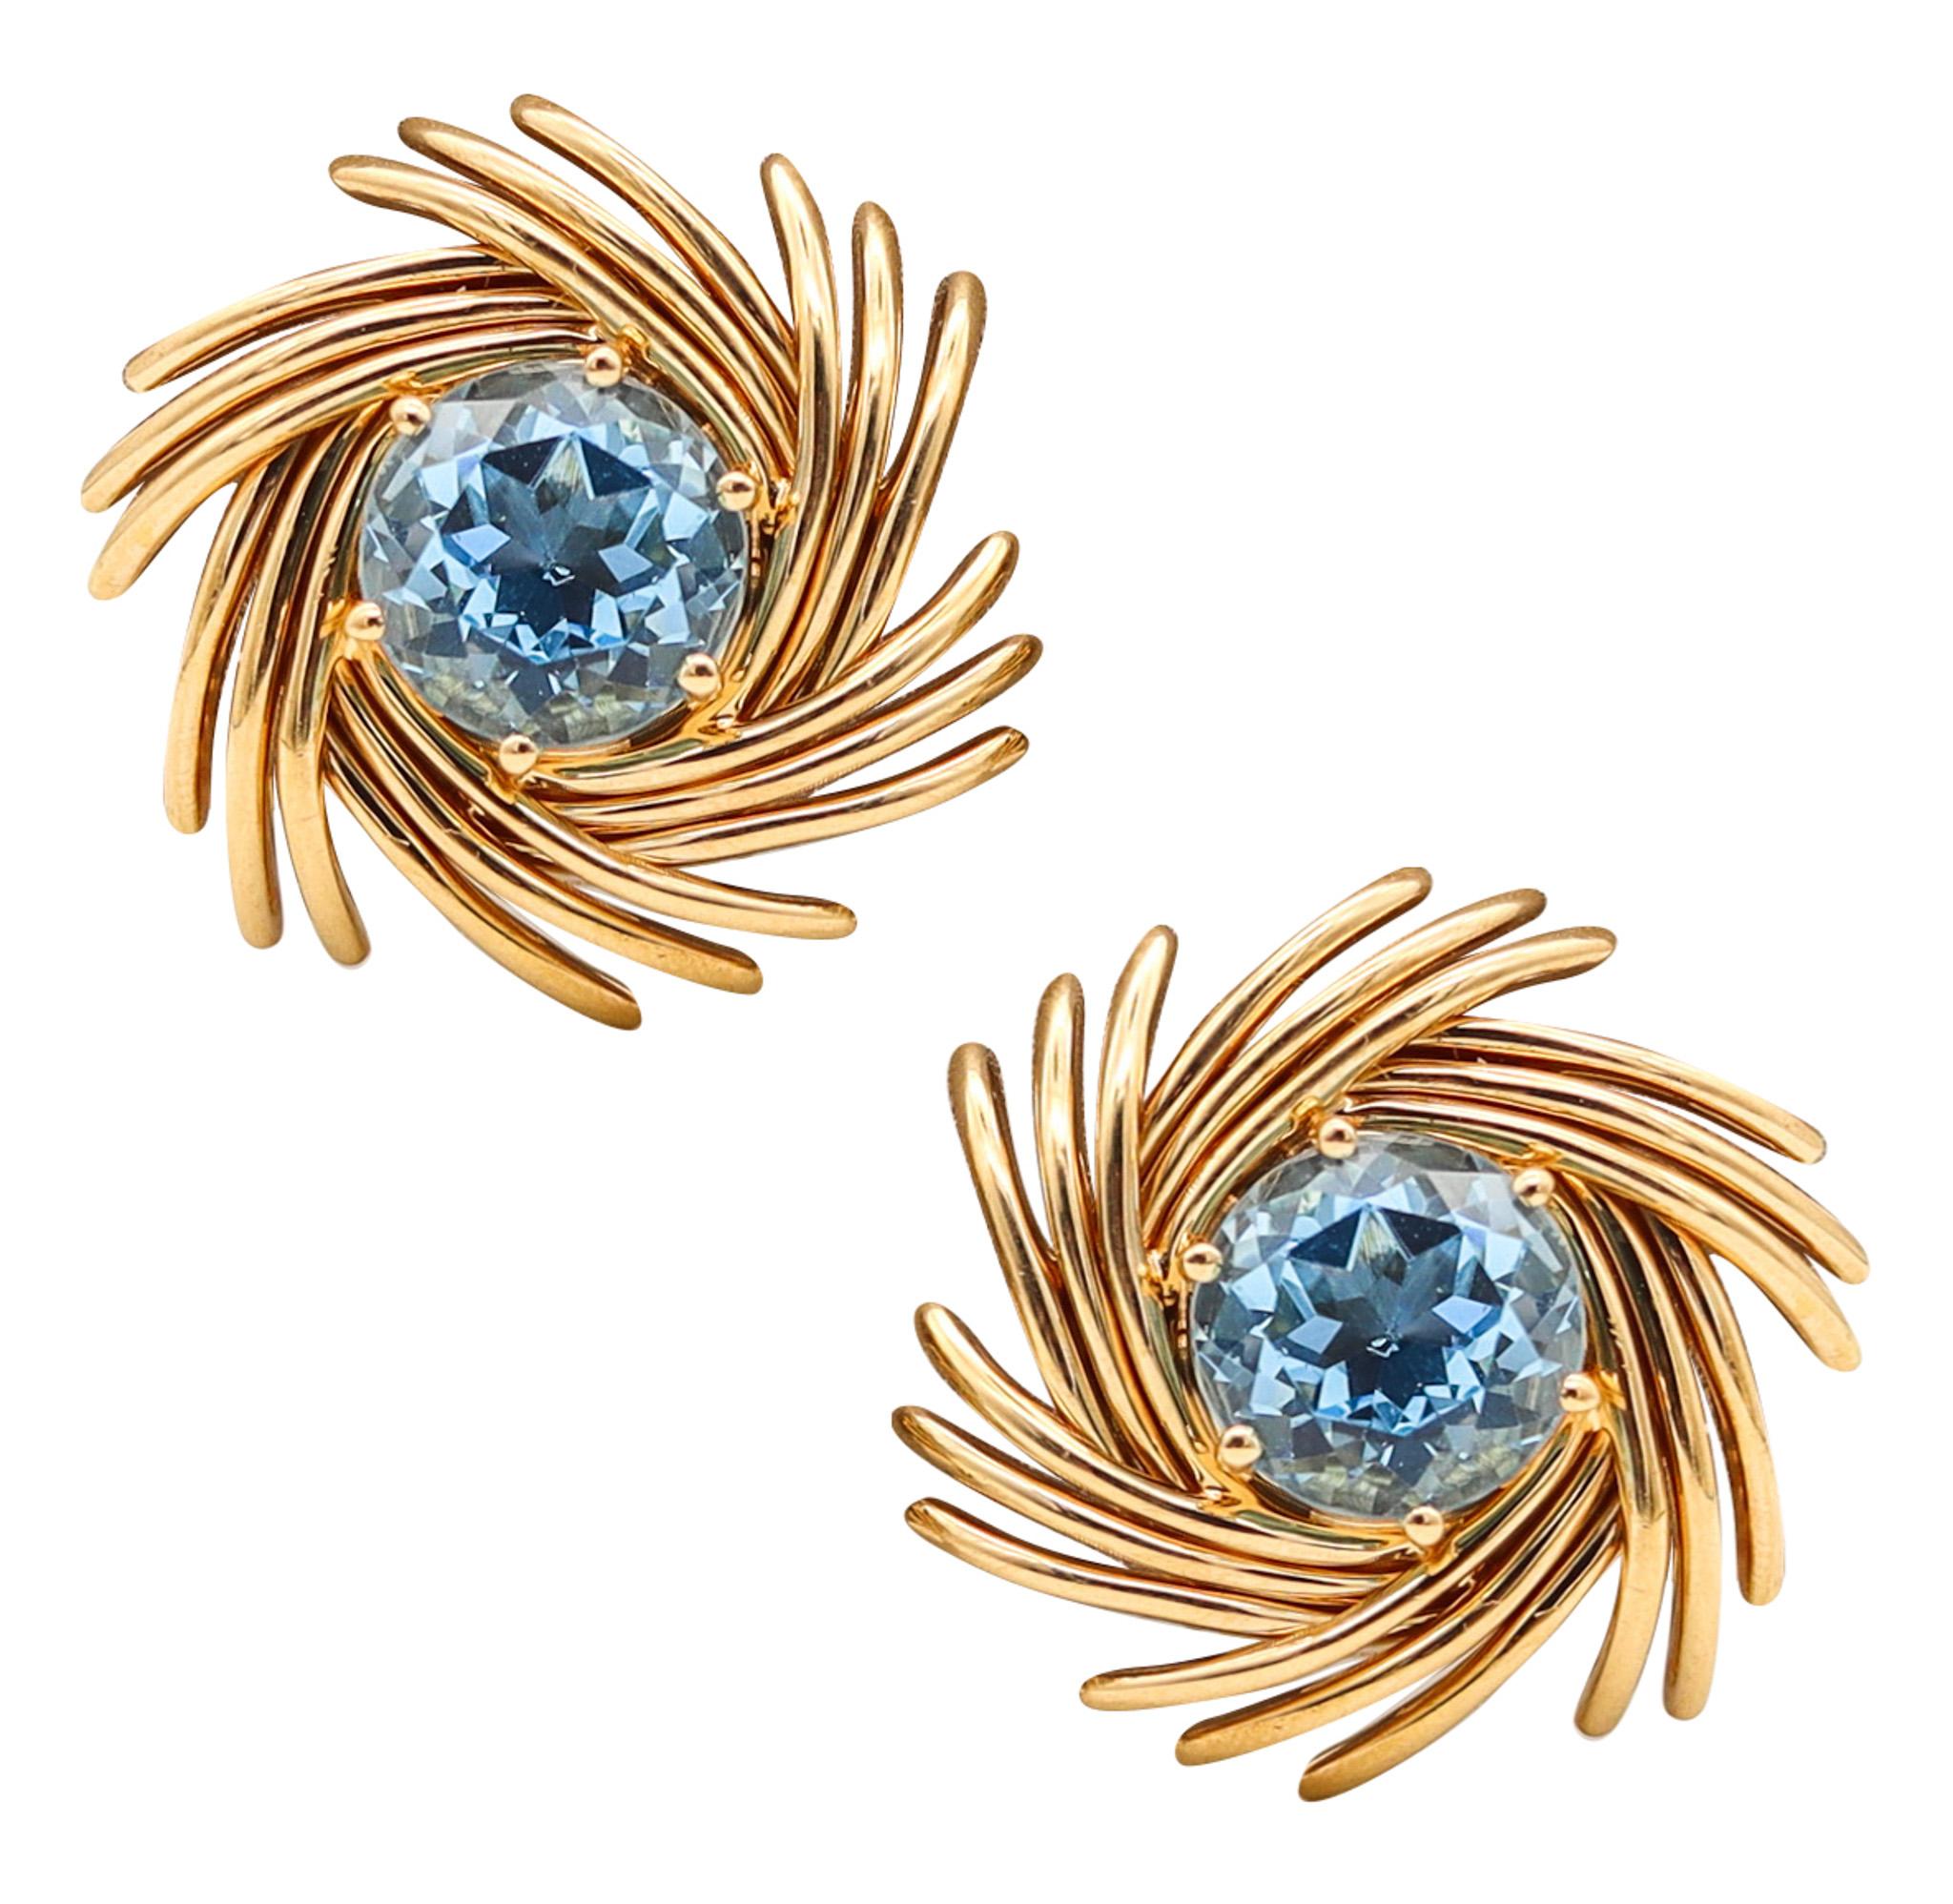 Tiffany & Co 1970 Jean Schlumberger Earrings In 18Kt Gold With 16 Ctw Aquamarine